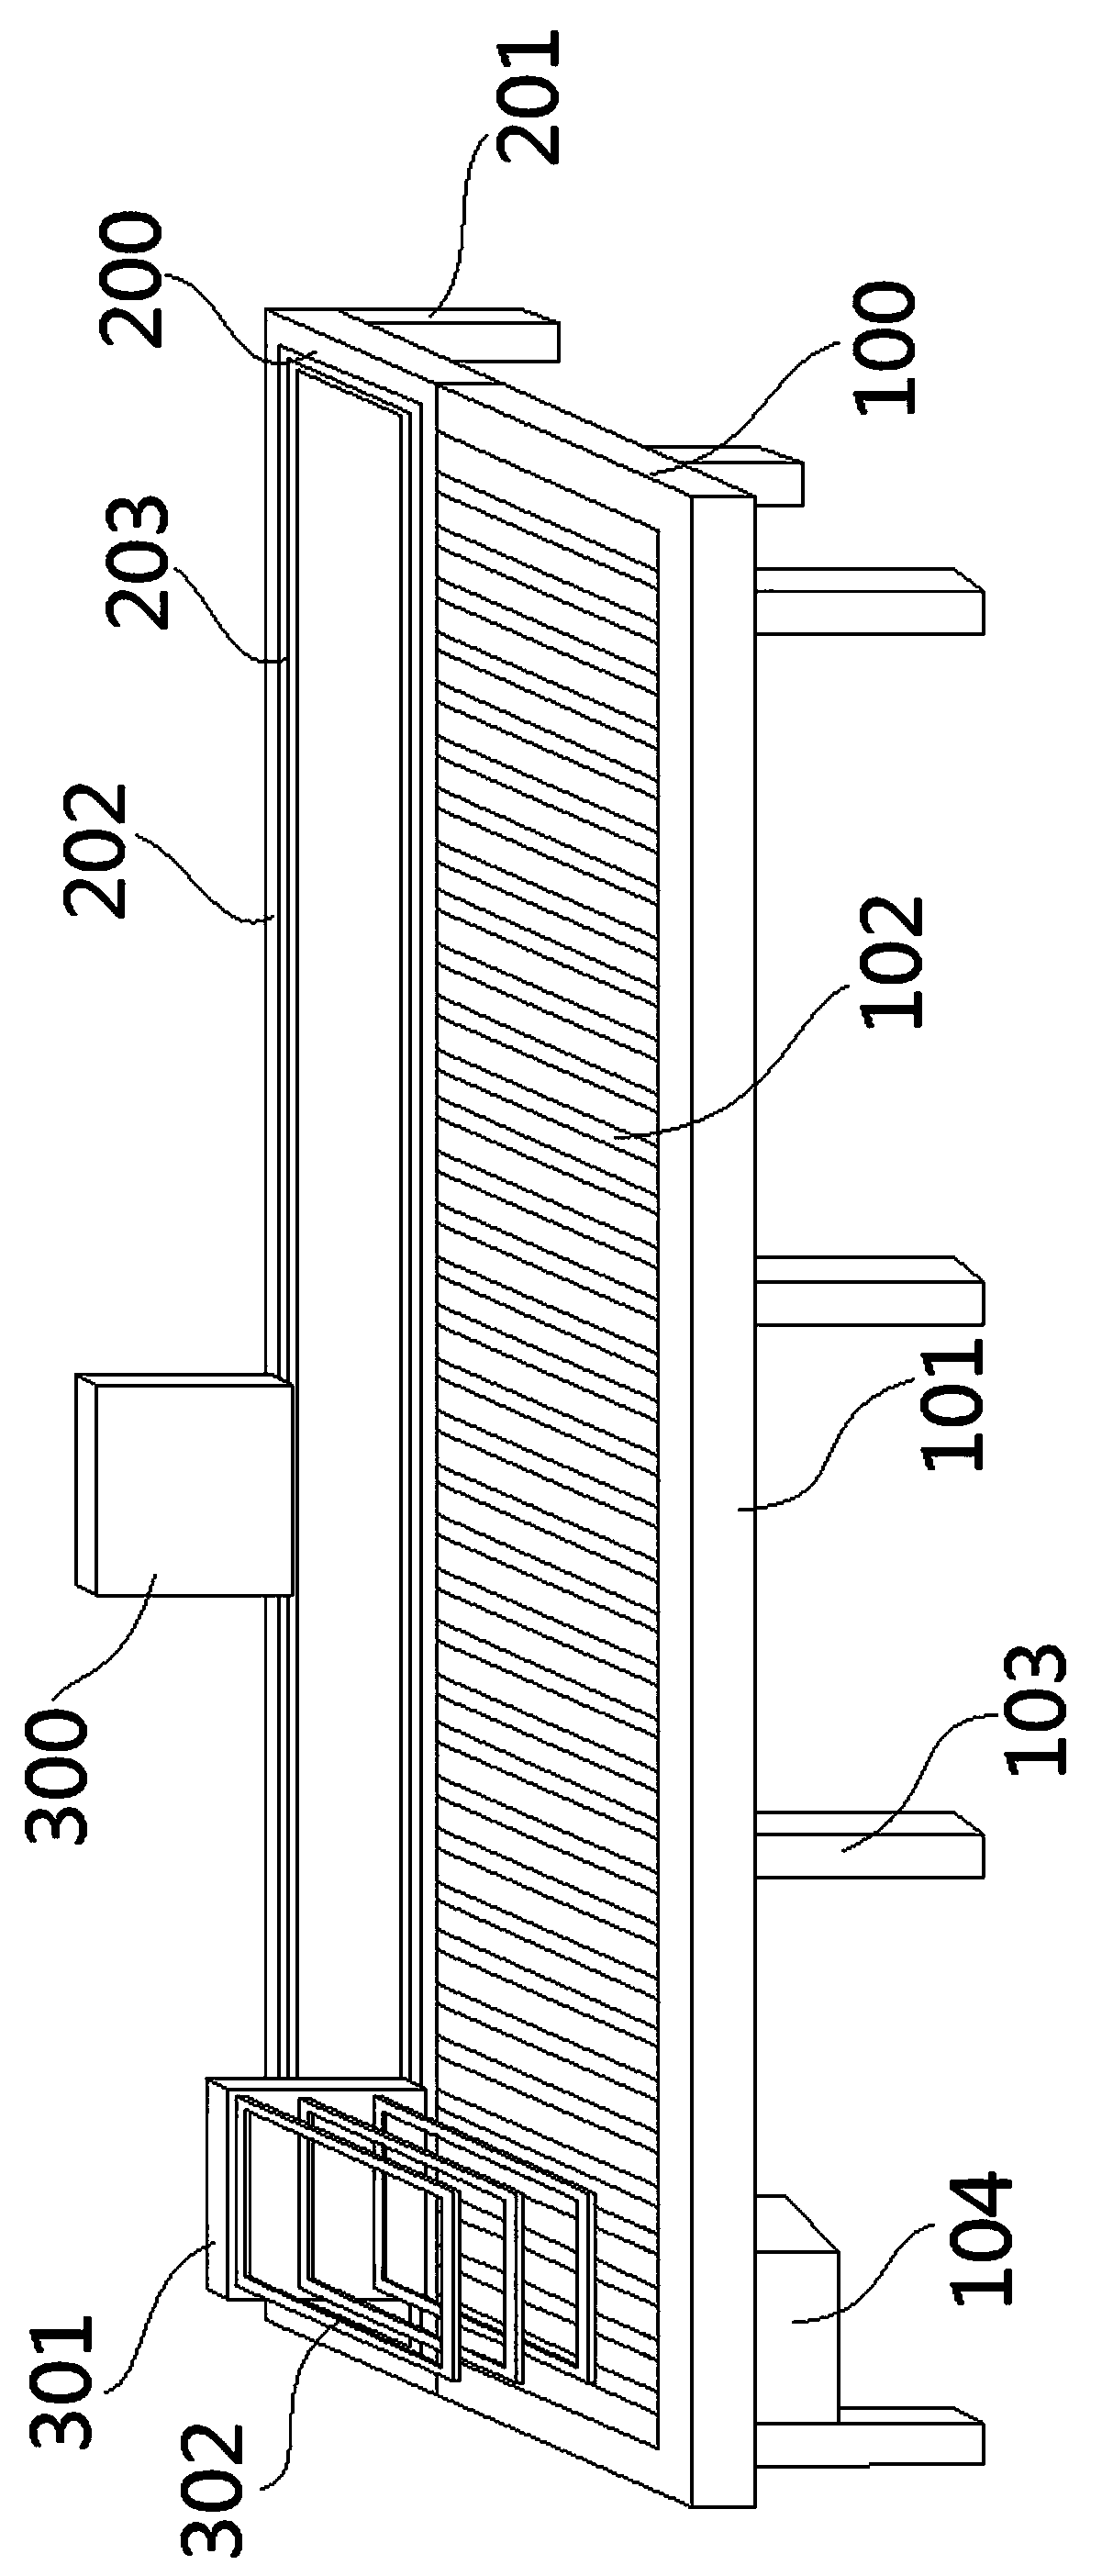 Medical conveying device